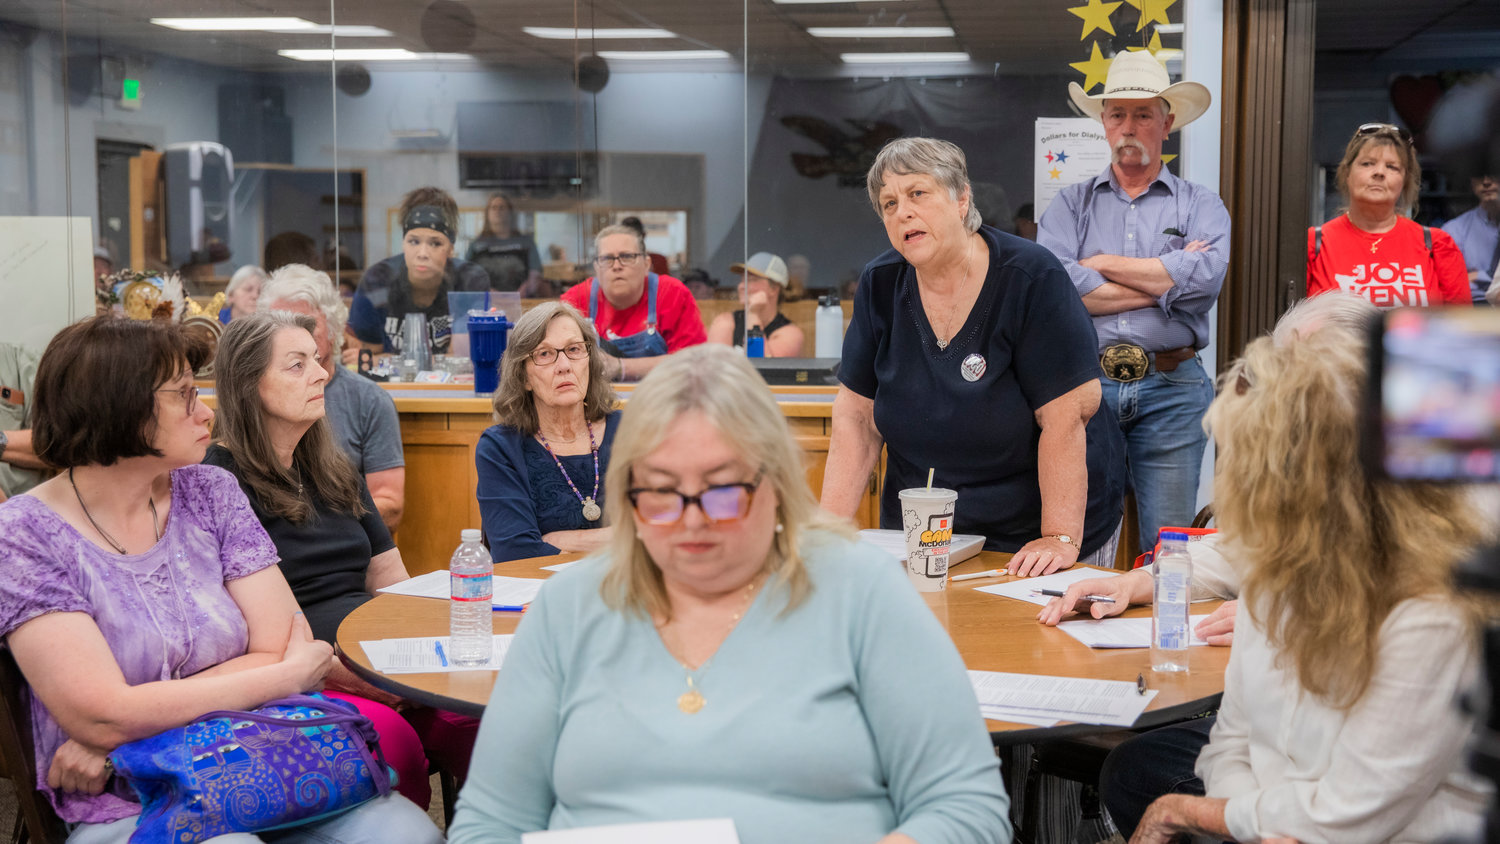 Carol Kearns, the Cowlitz Precinct Committee Officer, stands up to speak during a Lewis County Republicans meeting at the Chehalis Eagles Aerie Monday evening.